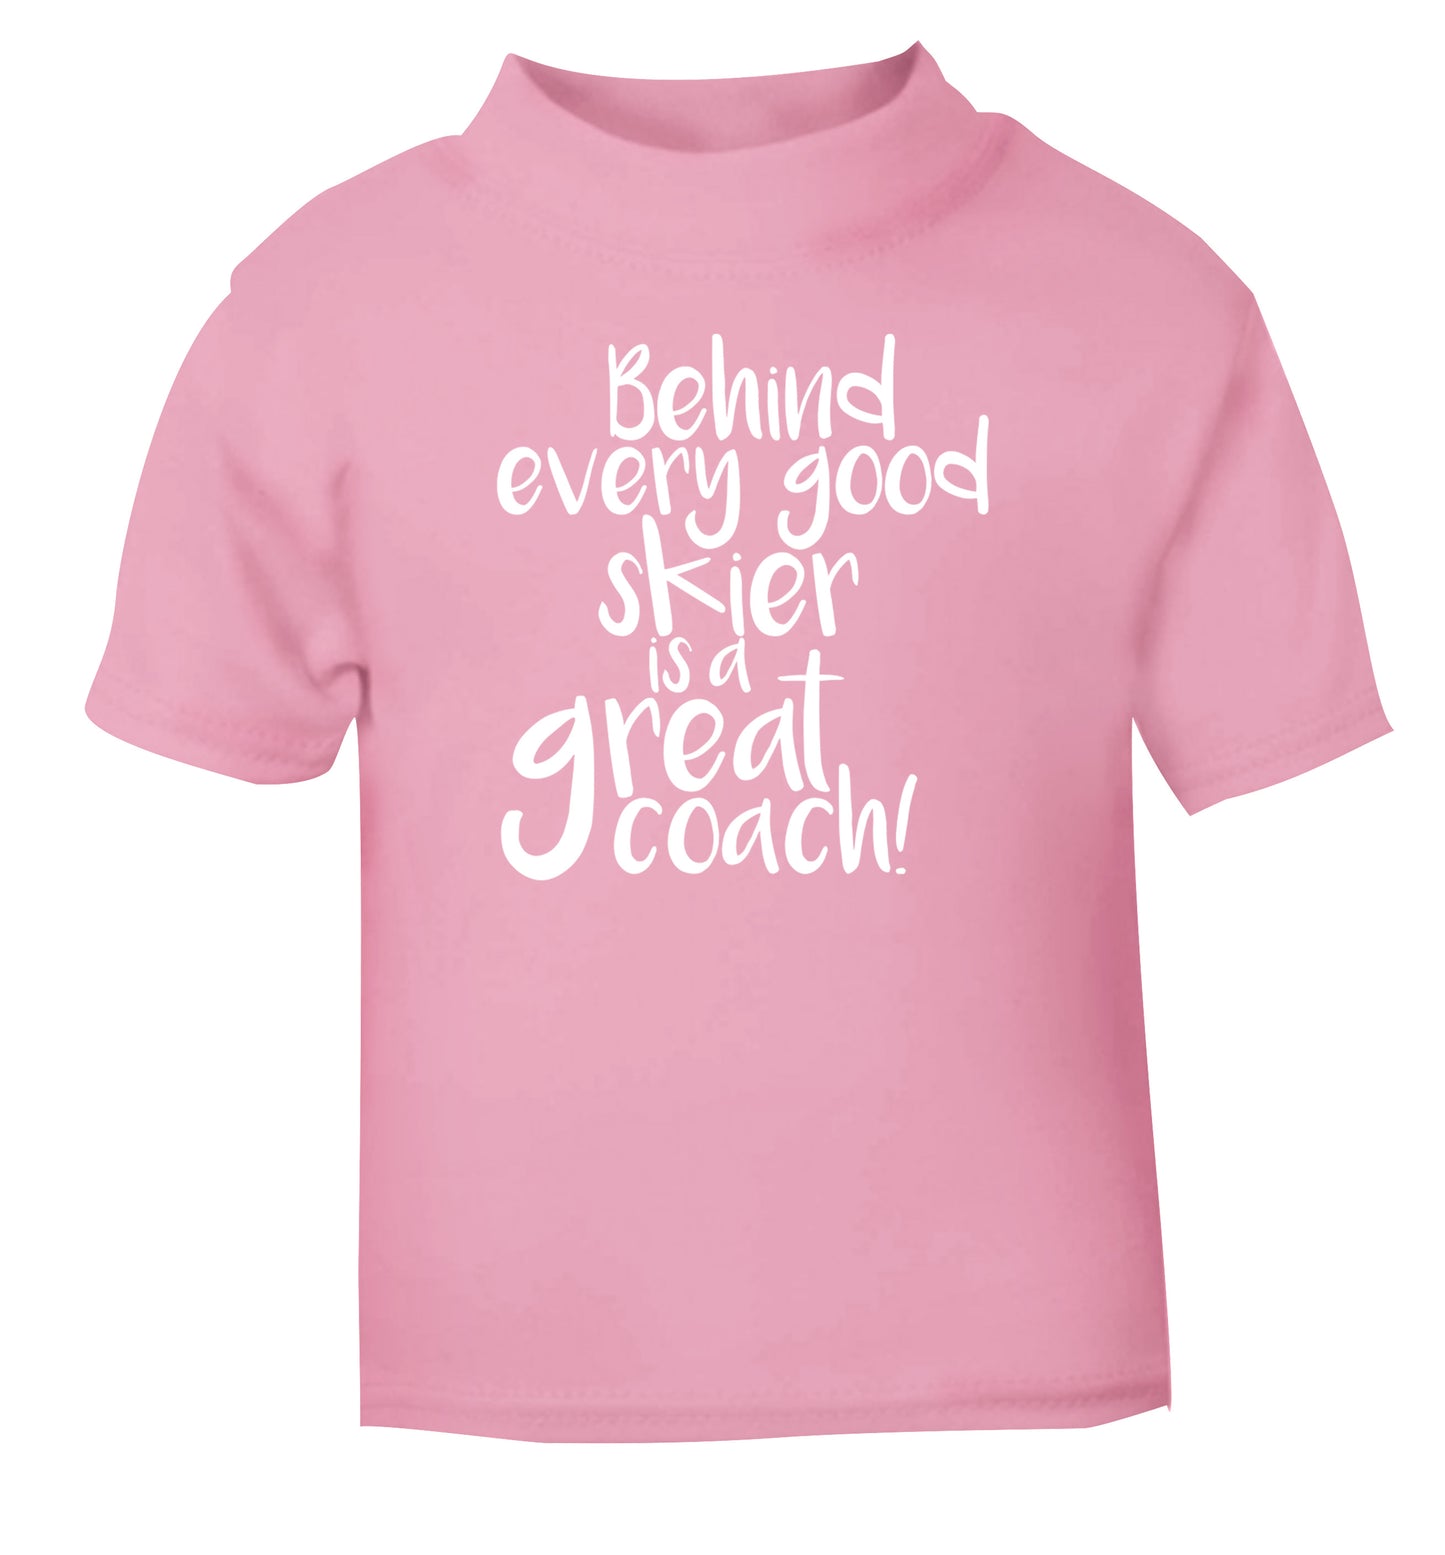 Behind every good skier is a great coach! light pink Baby Toddler Tshirt 2 Years